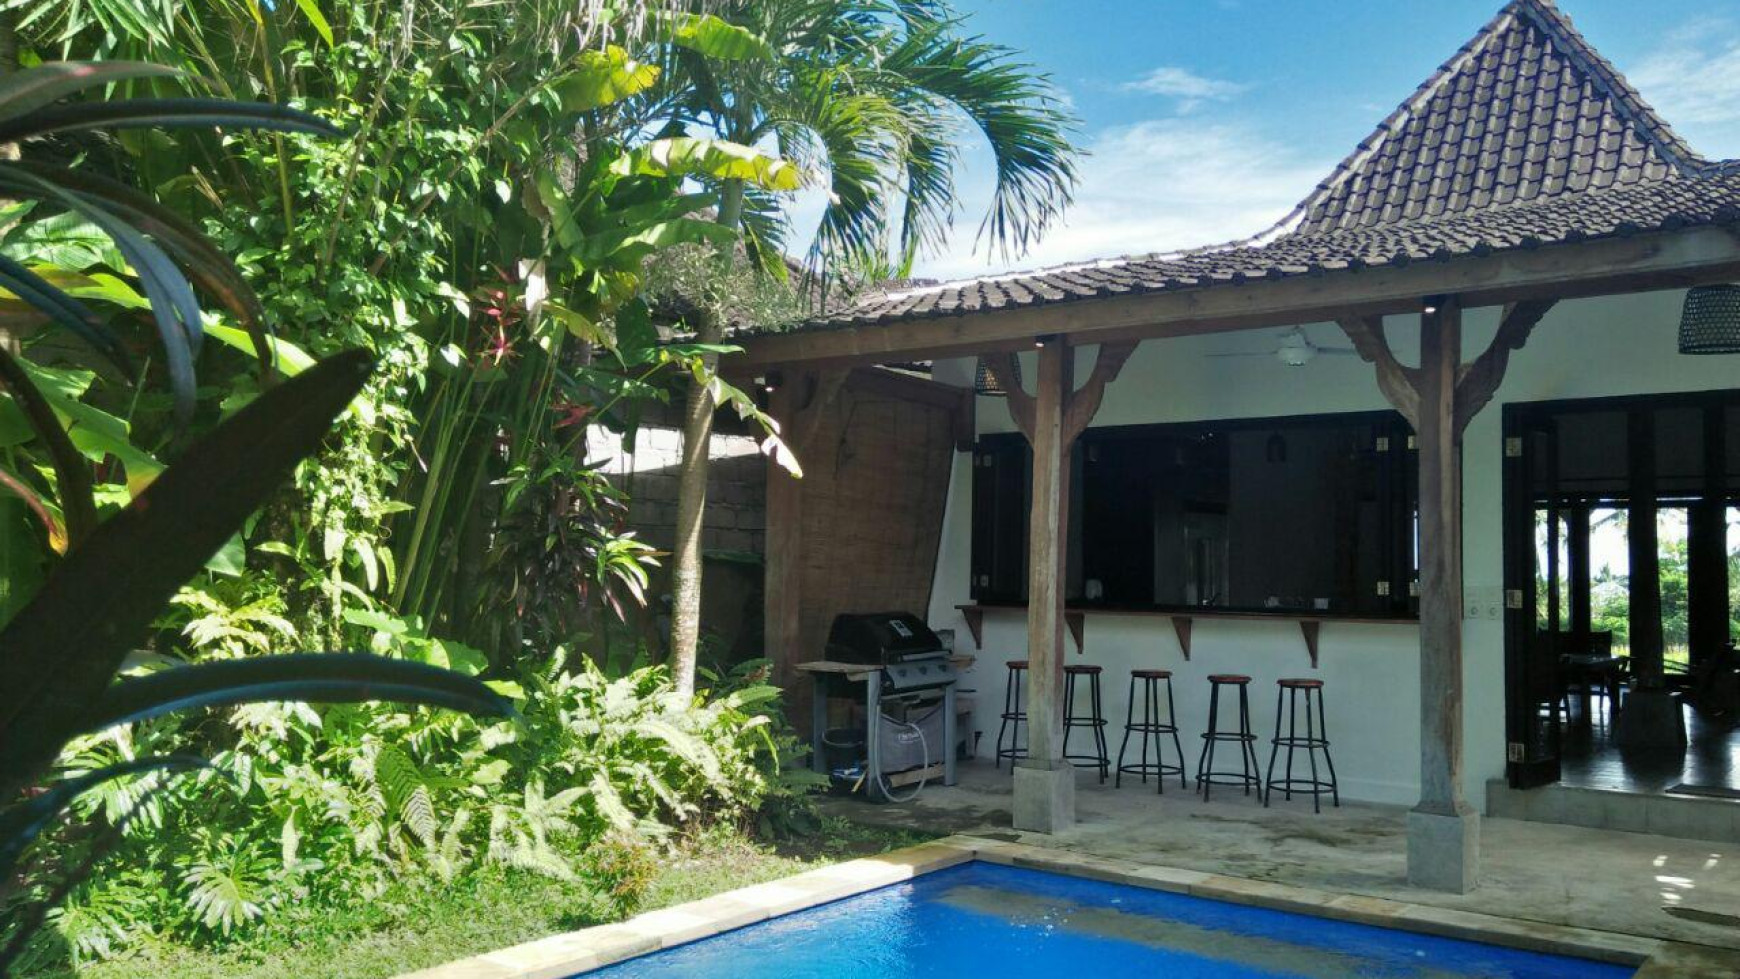 A Beautiful 3 Bedroom Leasehold Villa with Rice Field View For Sale, Located less than 5 minutes from Ubud Center